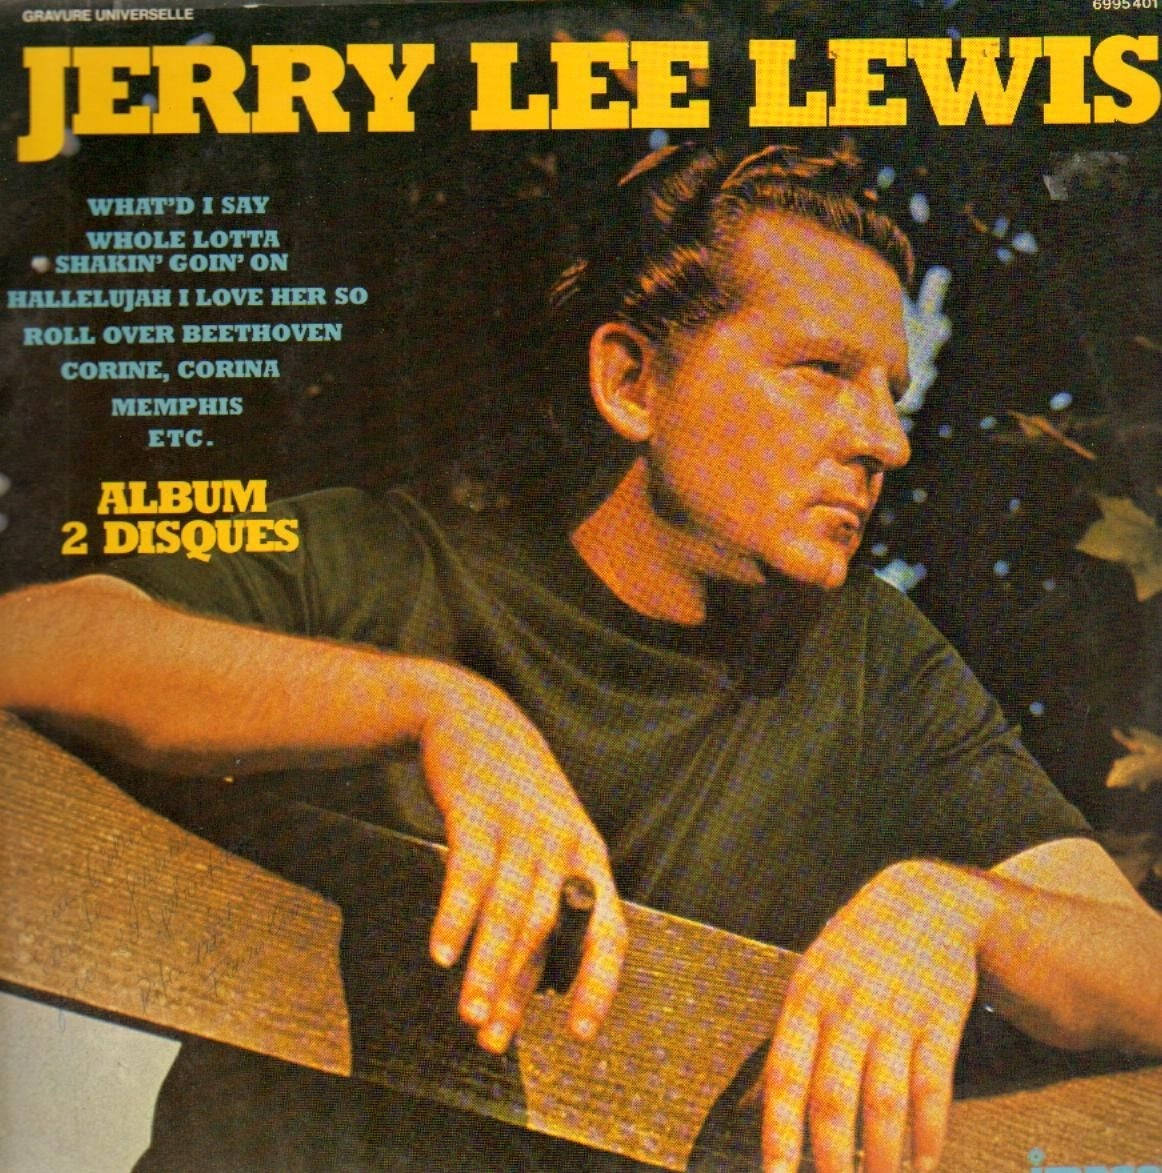 Jerry Lee Lewis Cover With Cigar